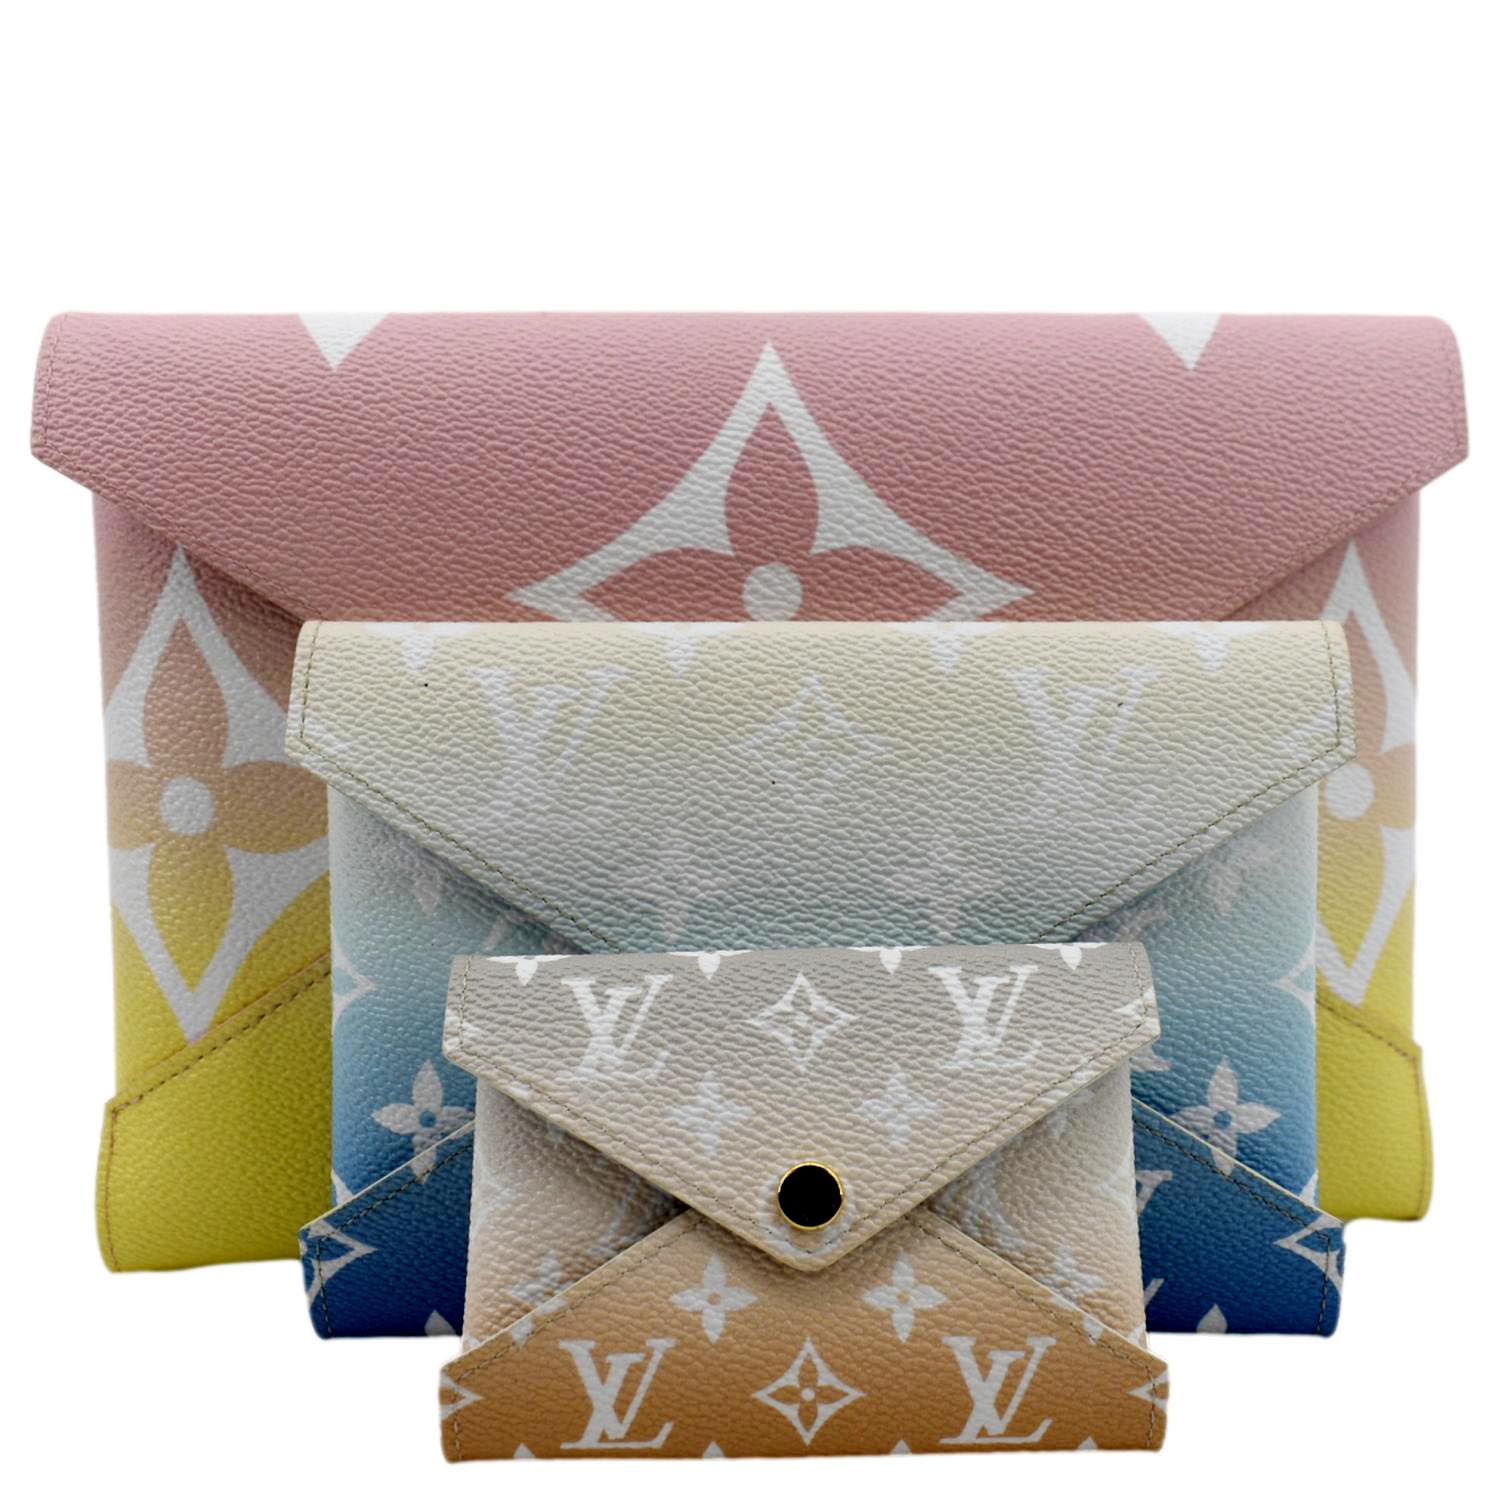 Louis Vuitton Giant Monogram Canvas By The Pool Kirigami Pouch Set